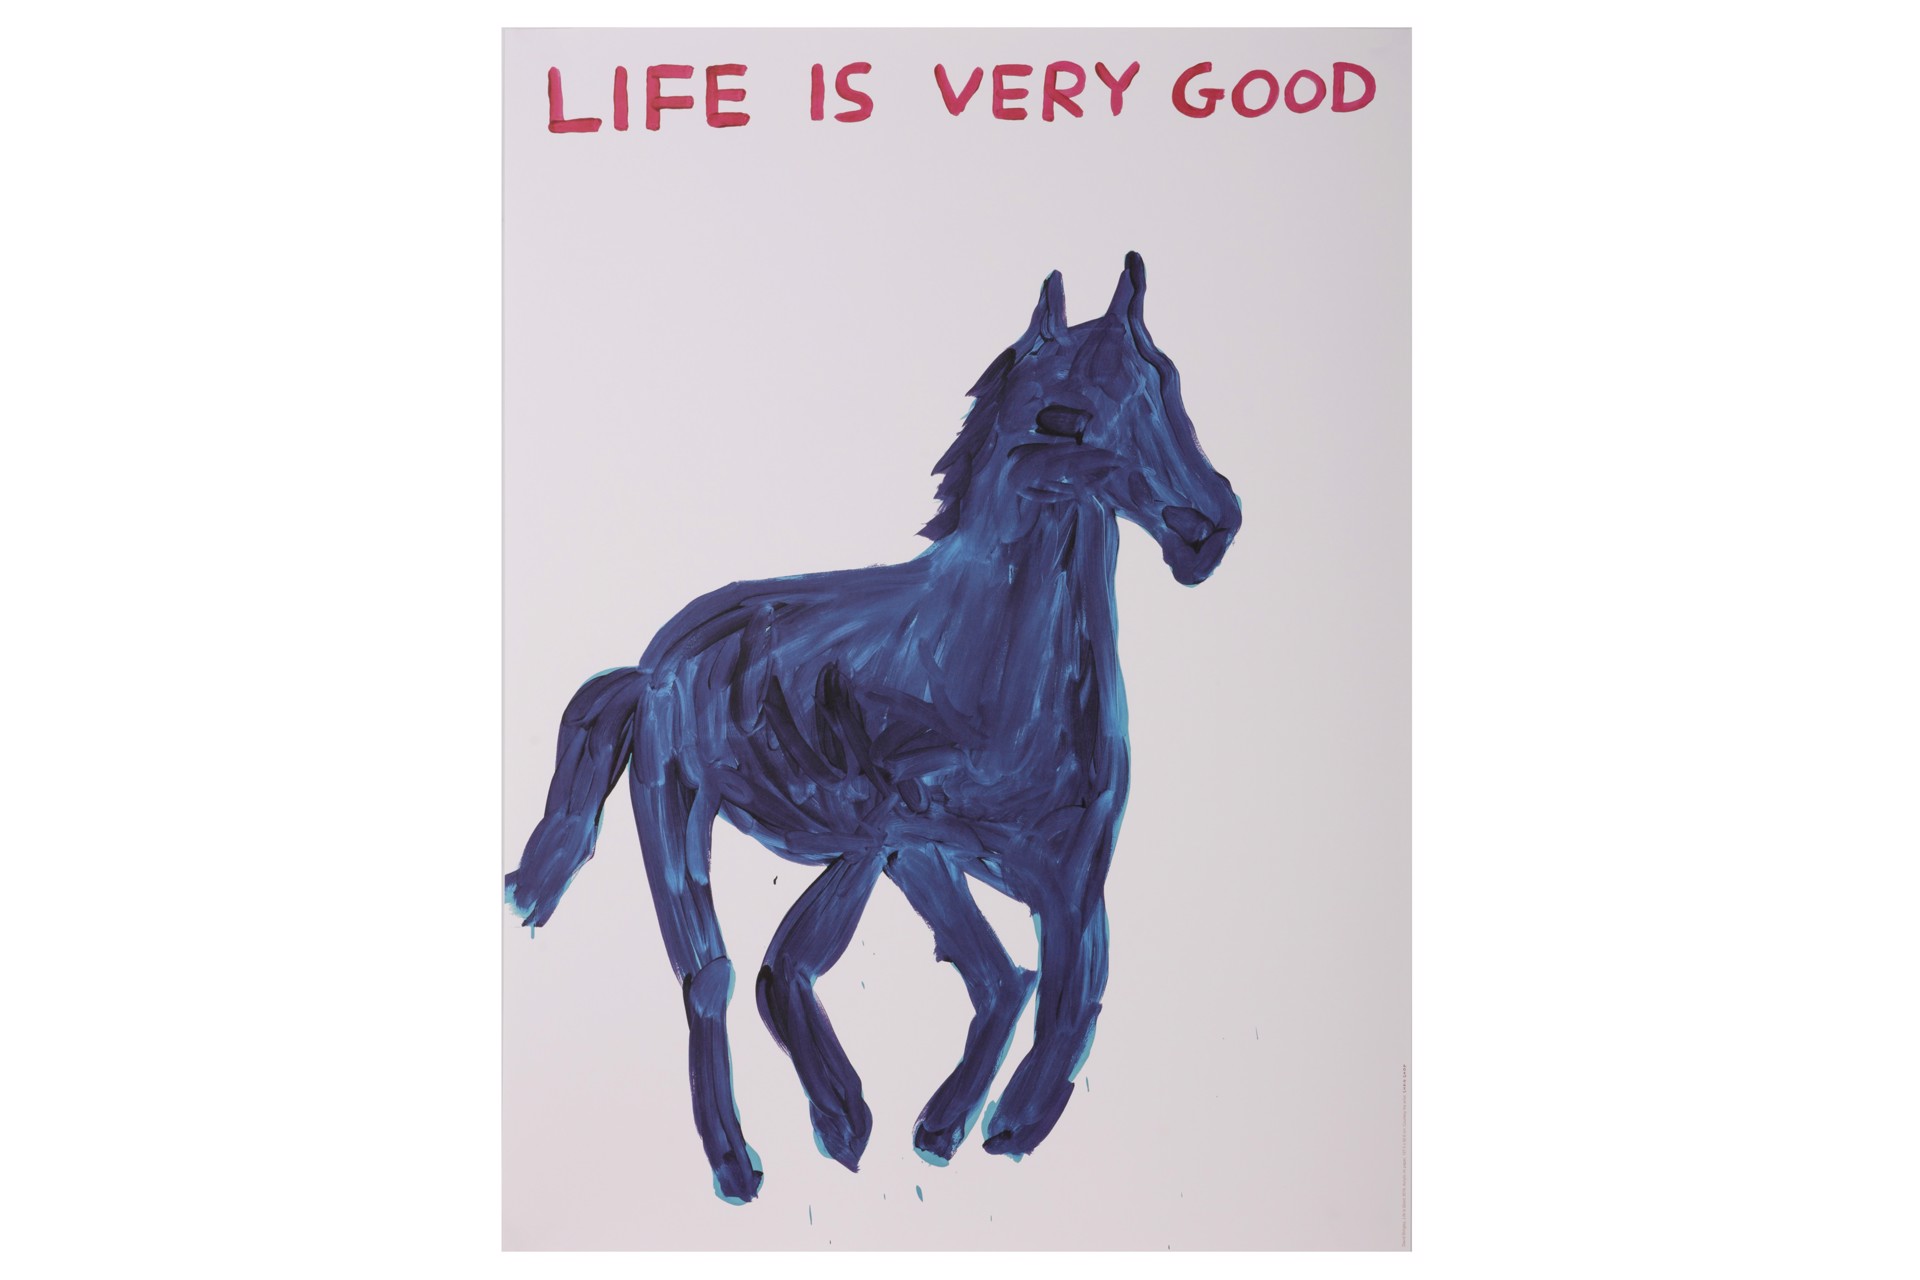 Life is Very Good by David Shrigley